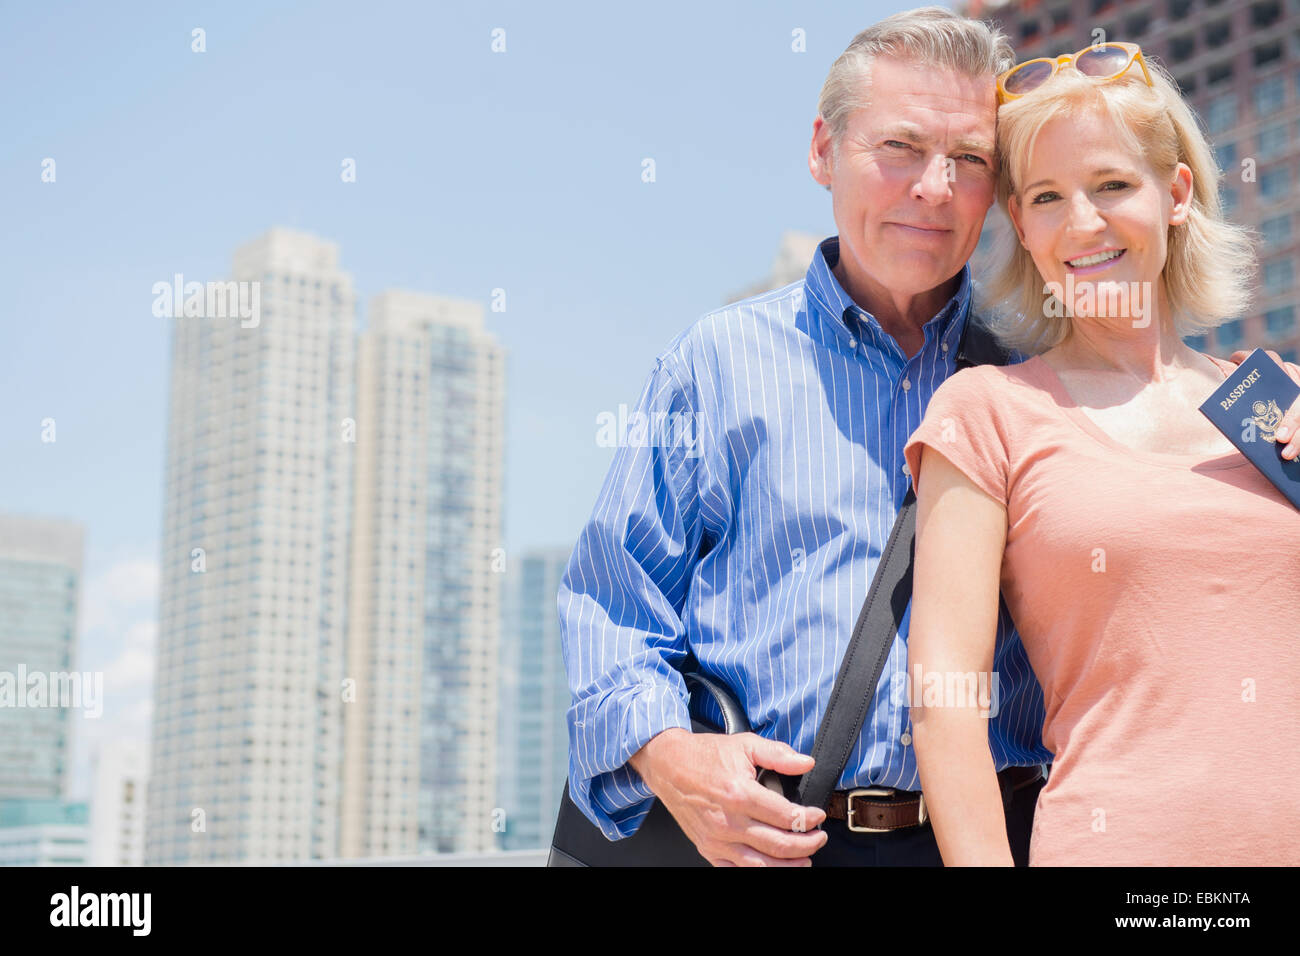 USA, New Jersey, Portrait of couple with passport against skyscrapers Stock Photo